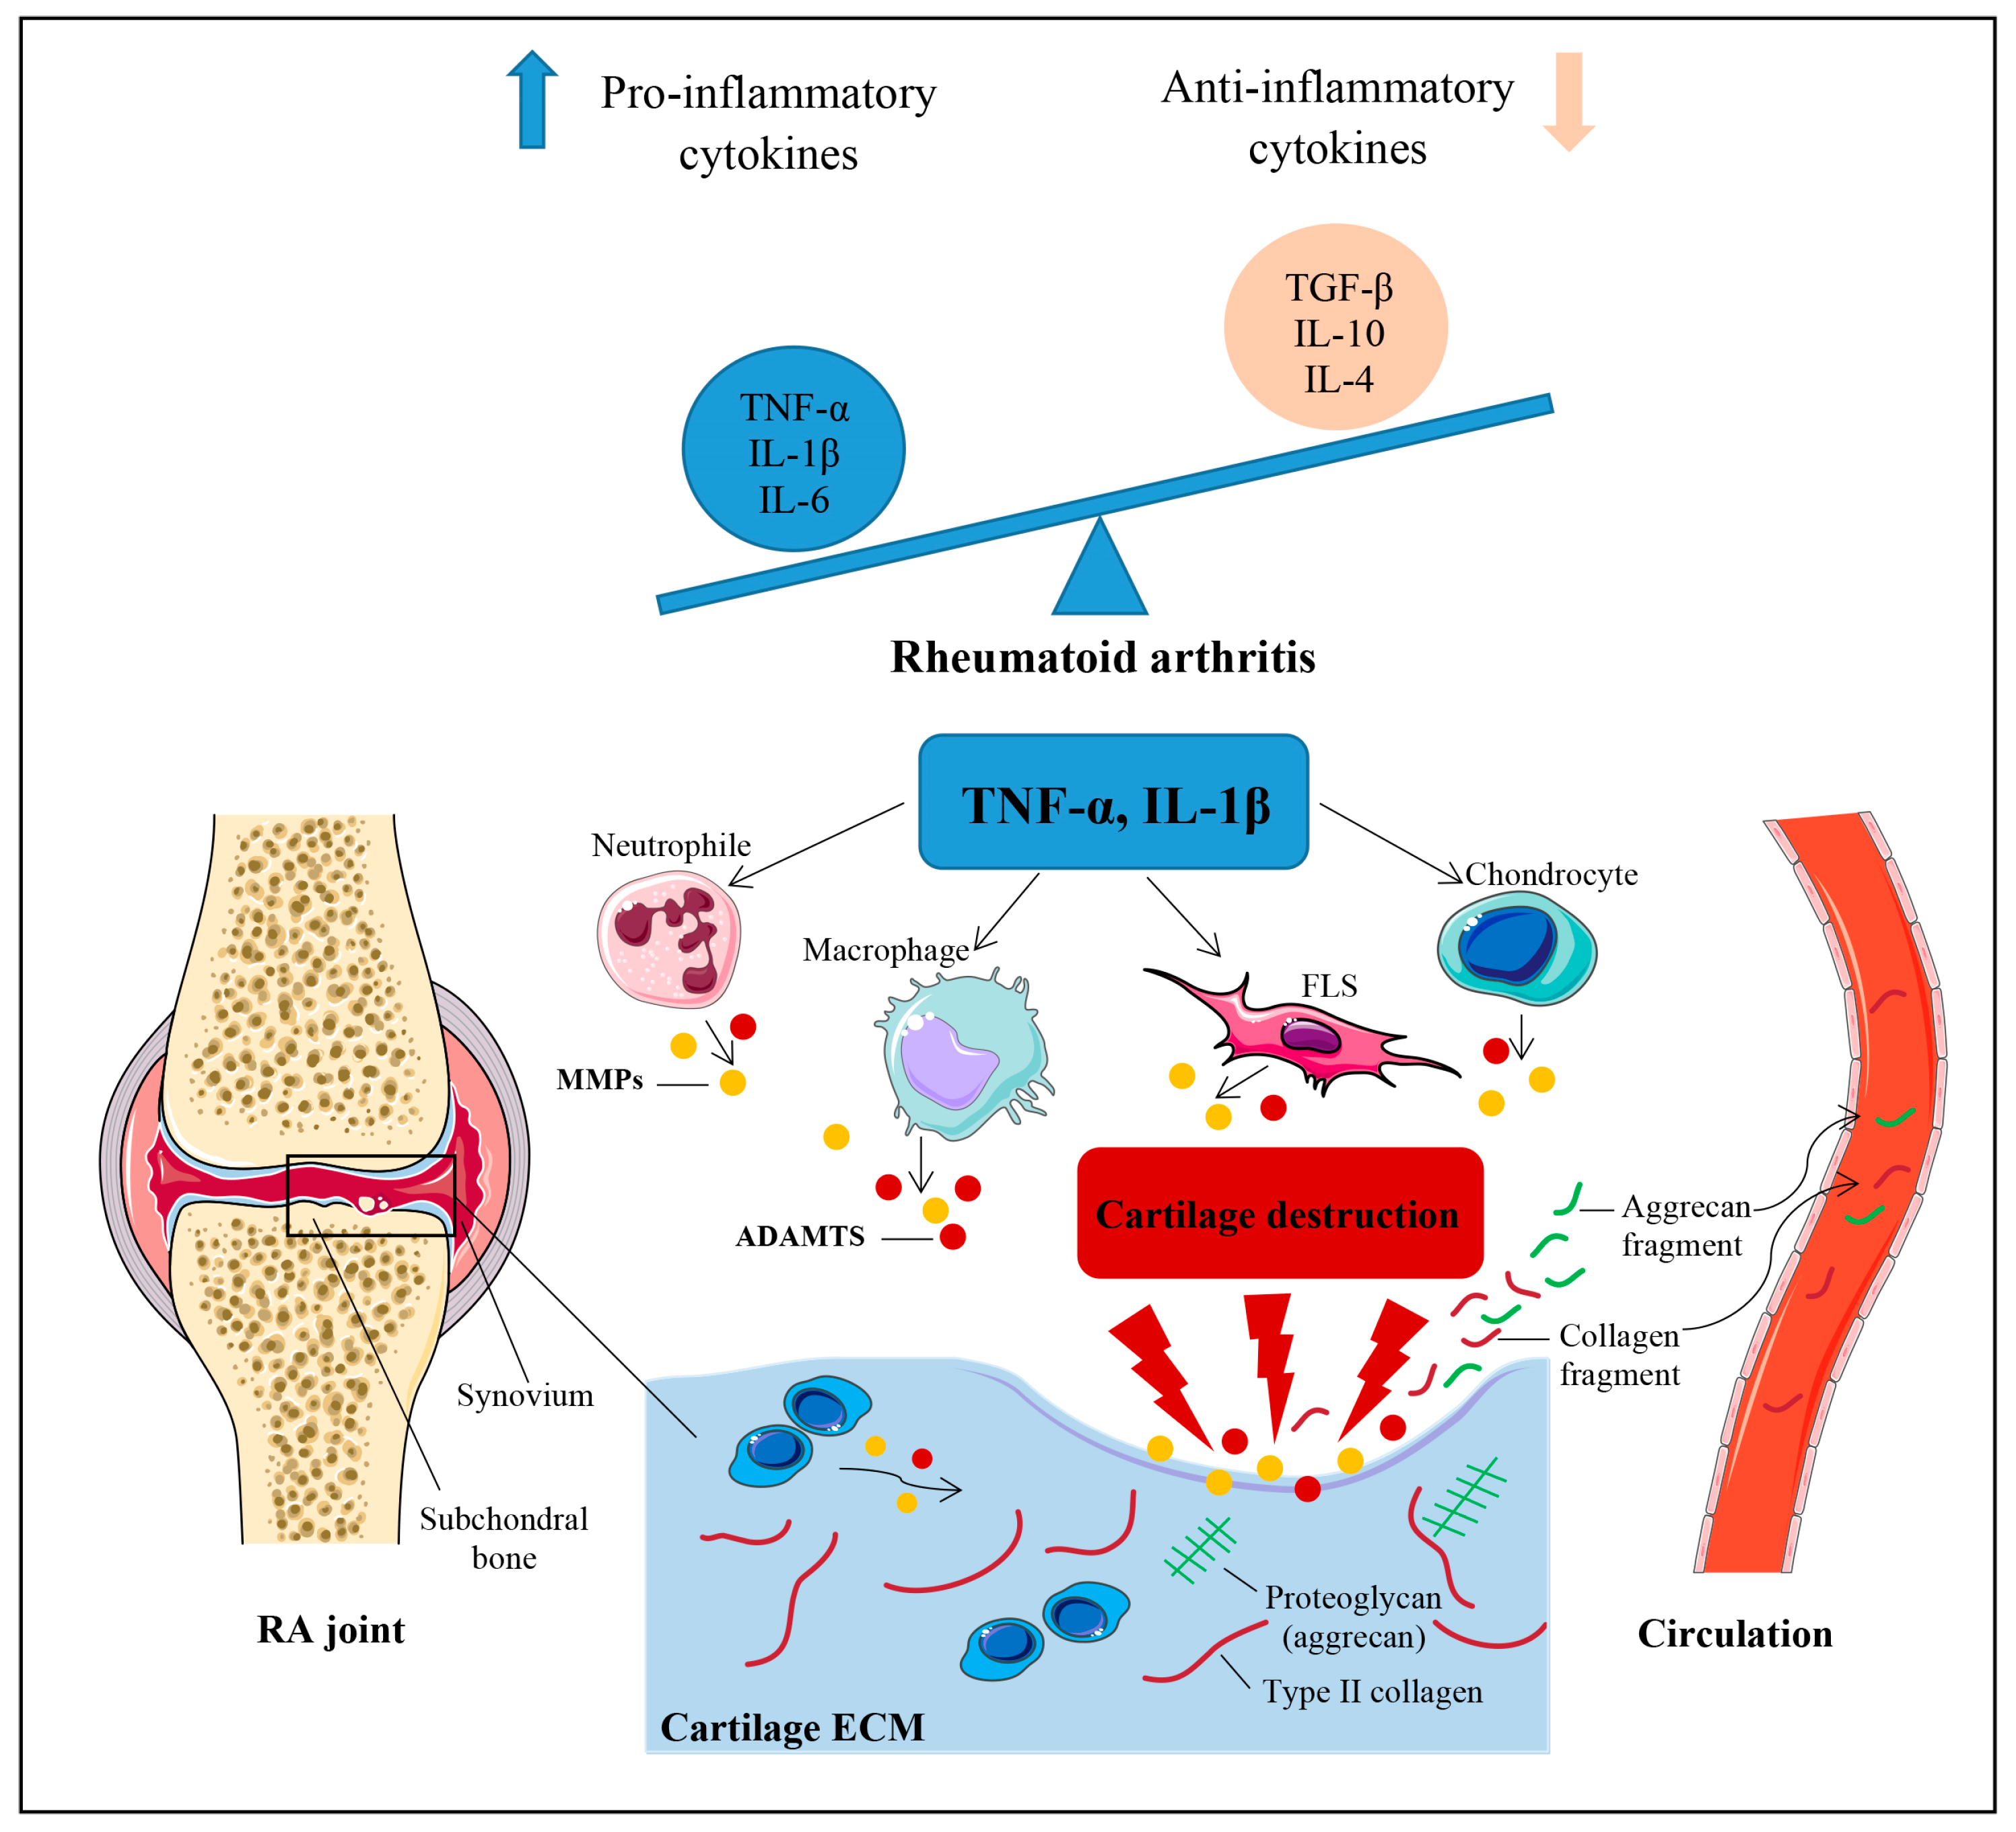 JCM | Free Full-Text | Effects of Etanercept and Adalimumab on Serum Levels  of Cartilage Remodeling Markers in Women with Rheumatoid Arthritis